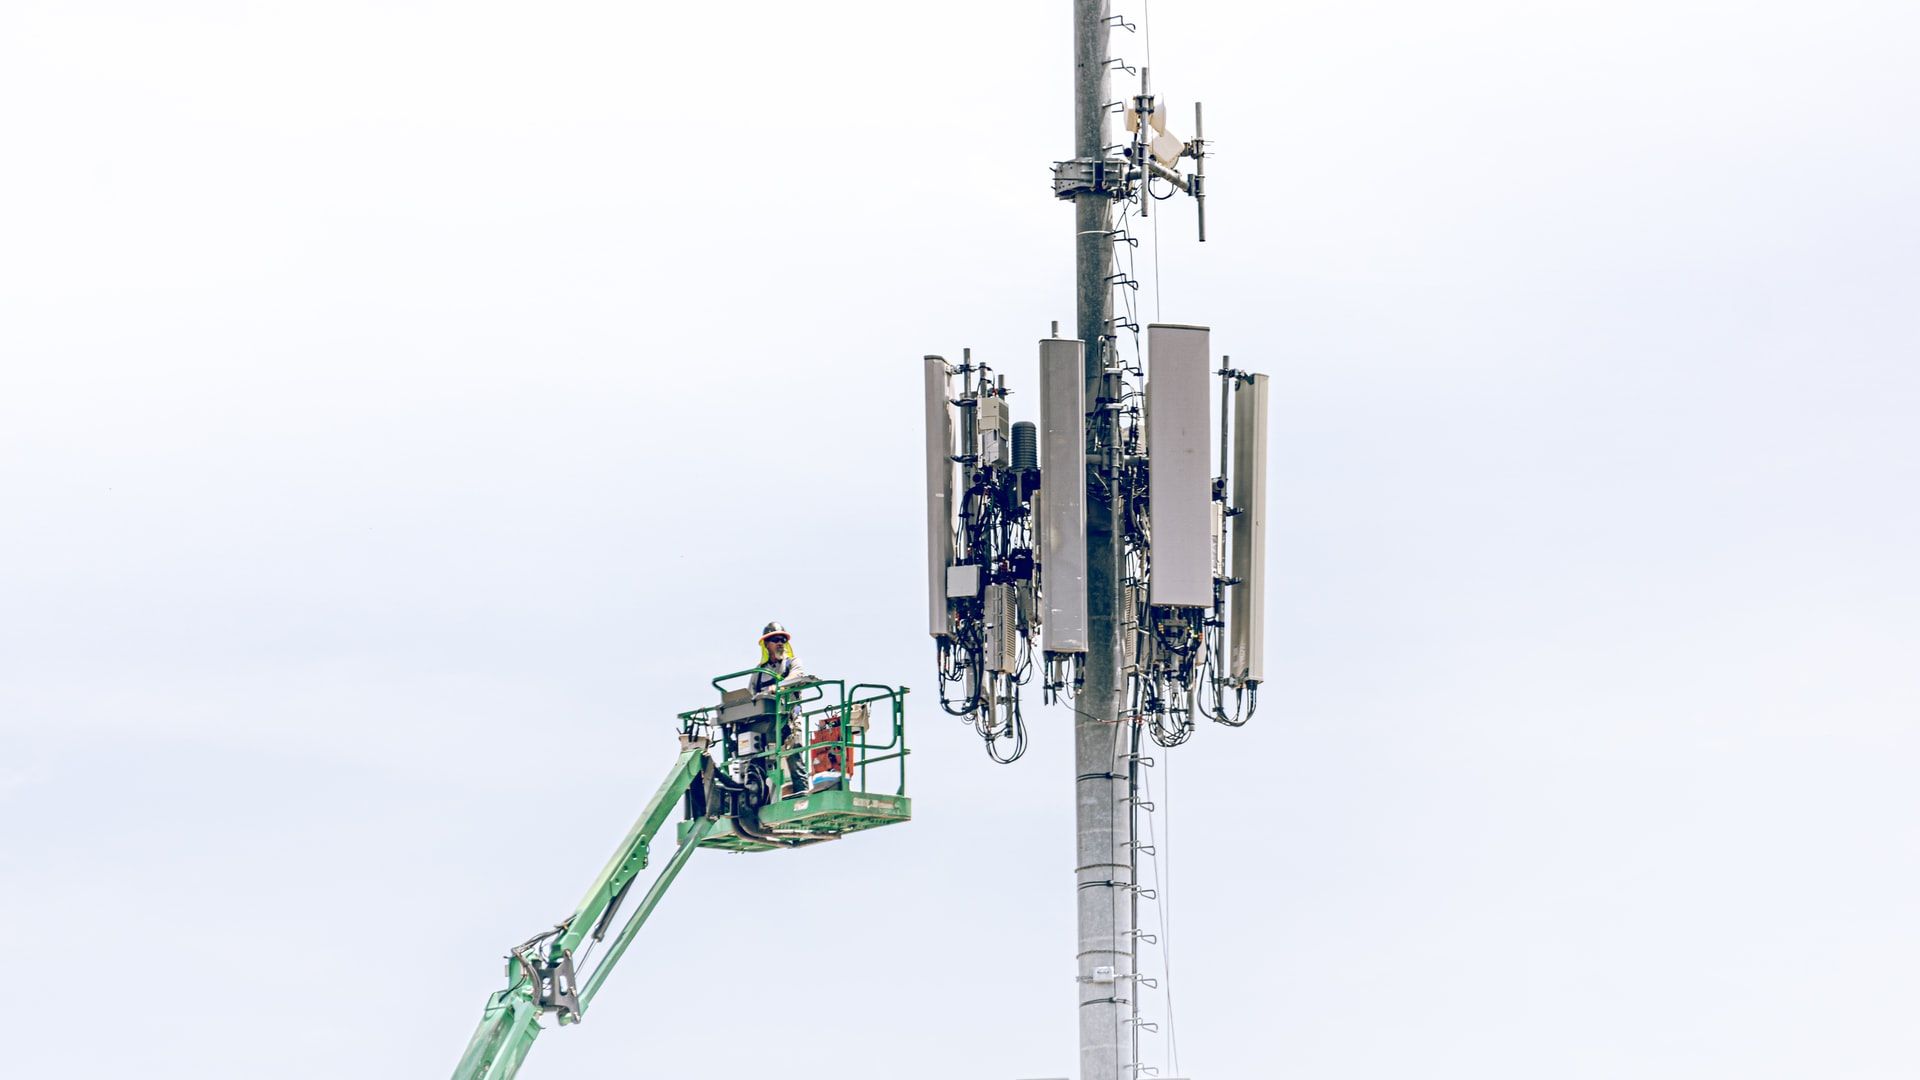 Image of a cell phone tower and a maintenance worker on a boom lift